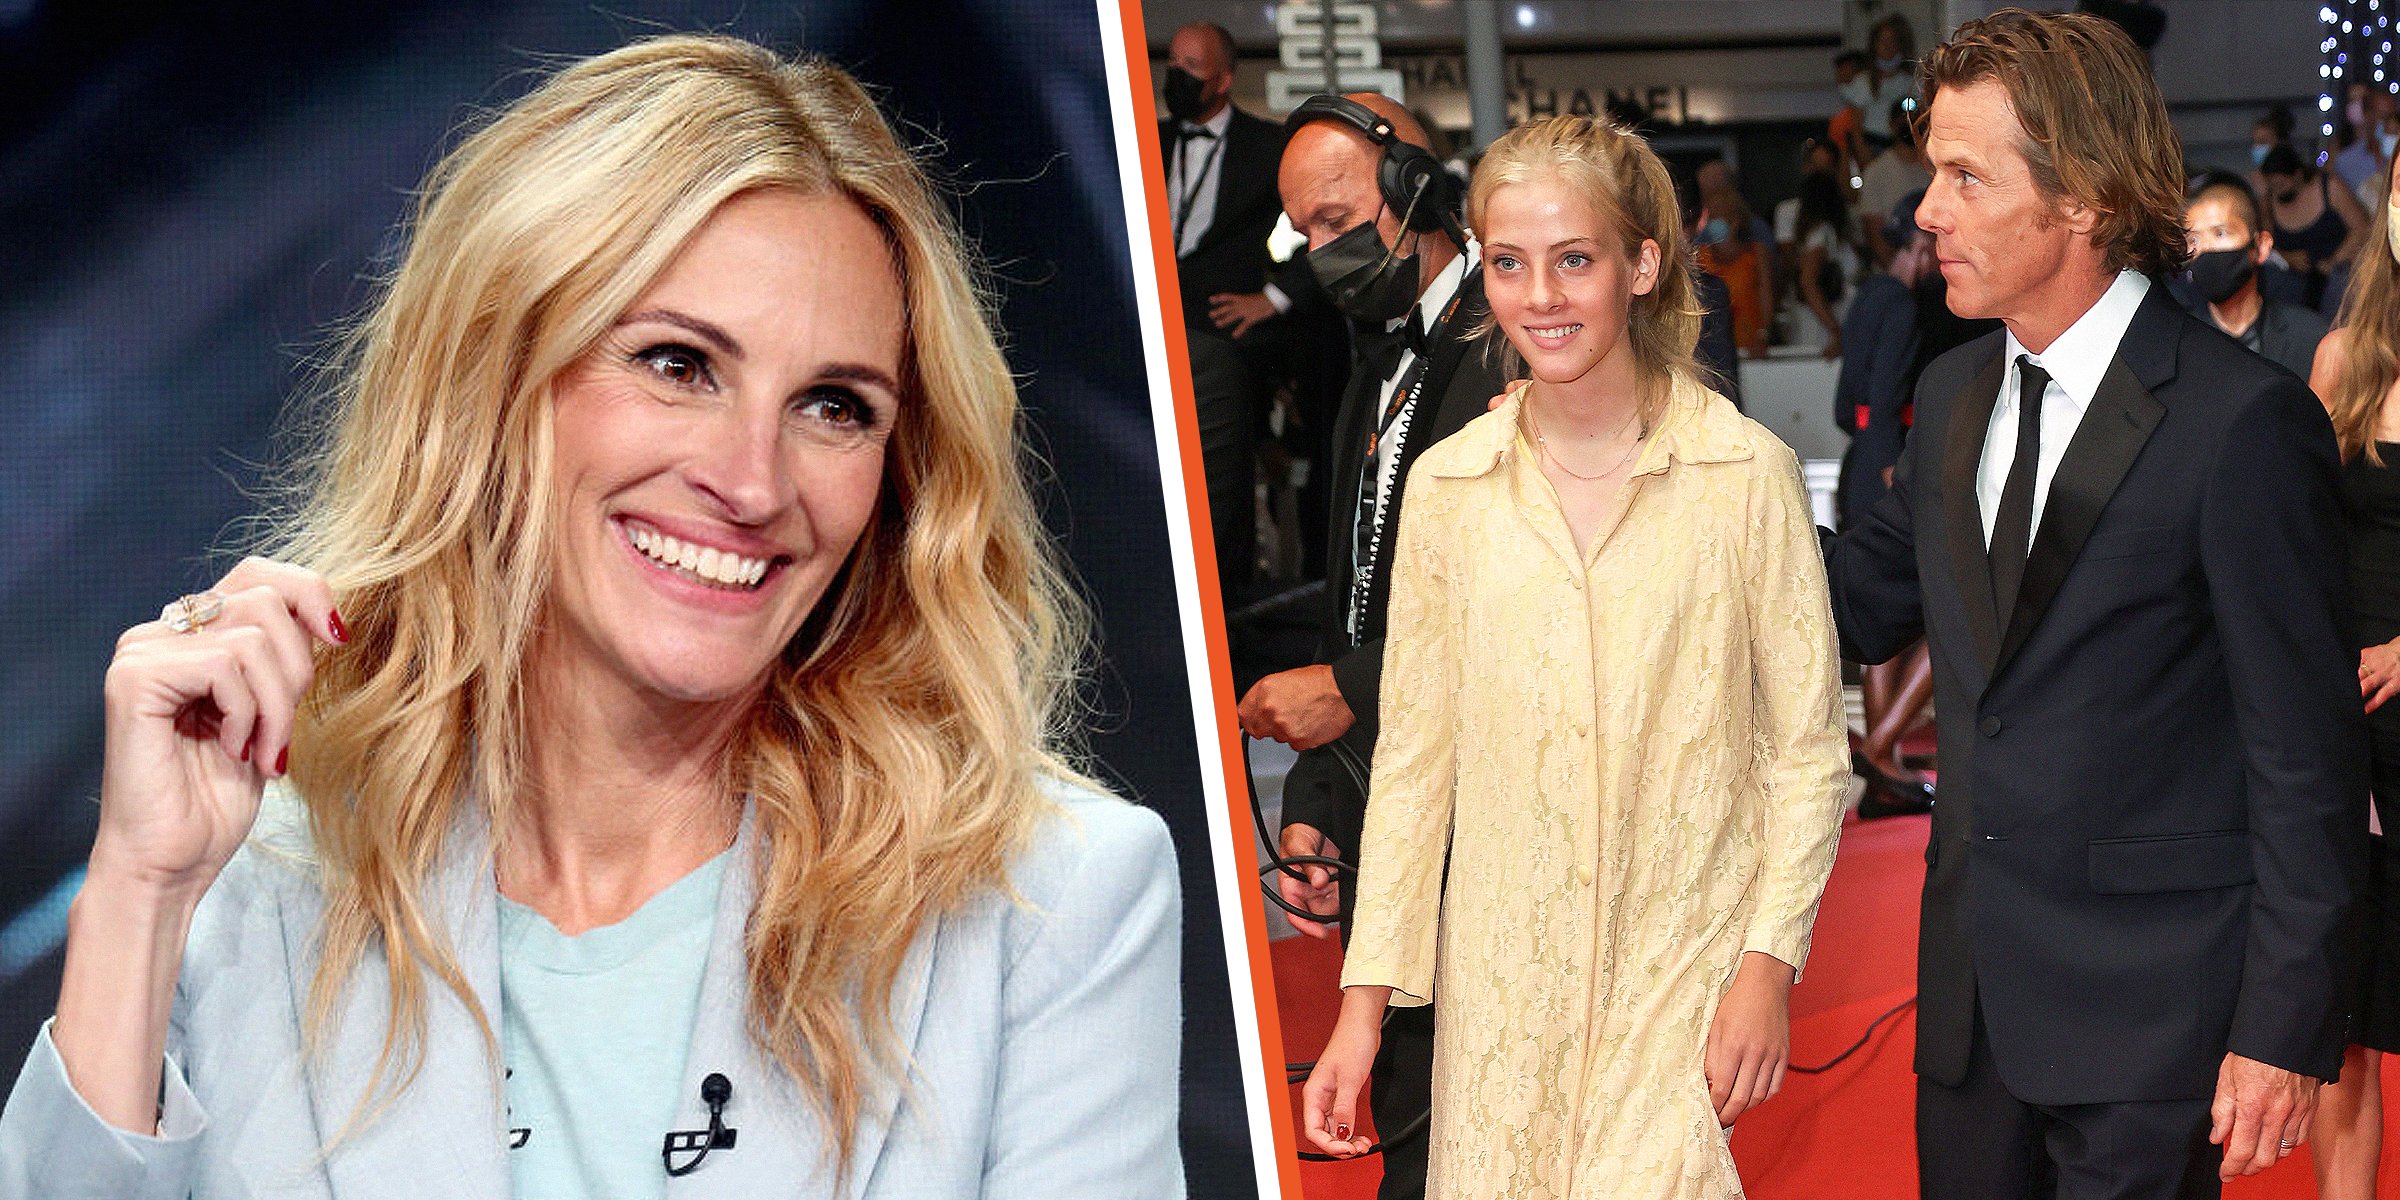 Hazel Moder Is Julia Roberts’ Teenage Daughter Who Has Already Made Her